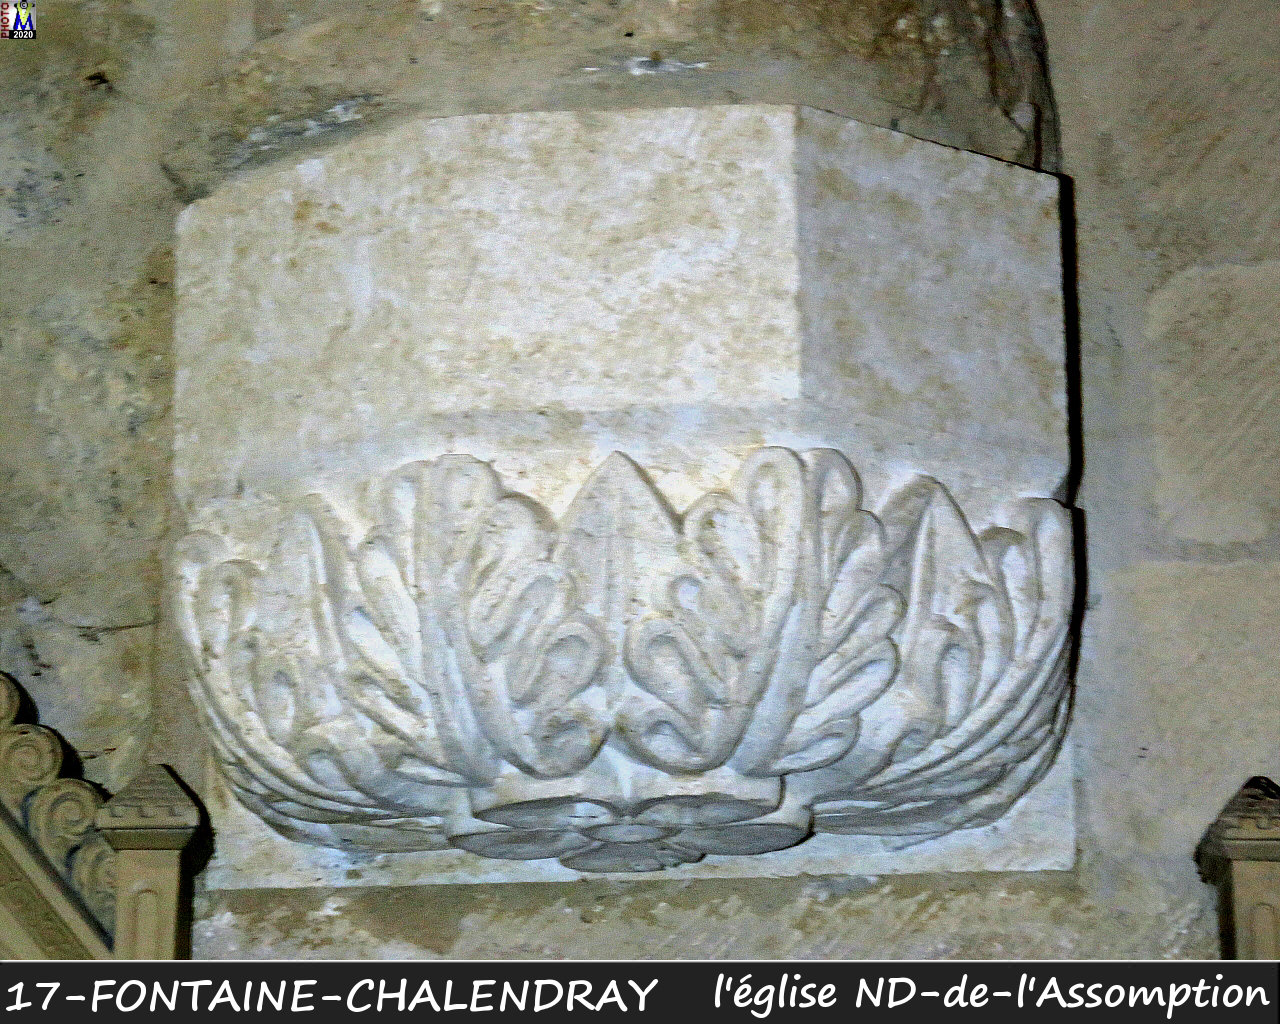 17FONTAINE-CHALENDRAY_eglise_1120.jpg